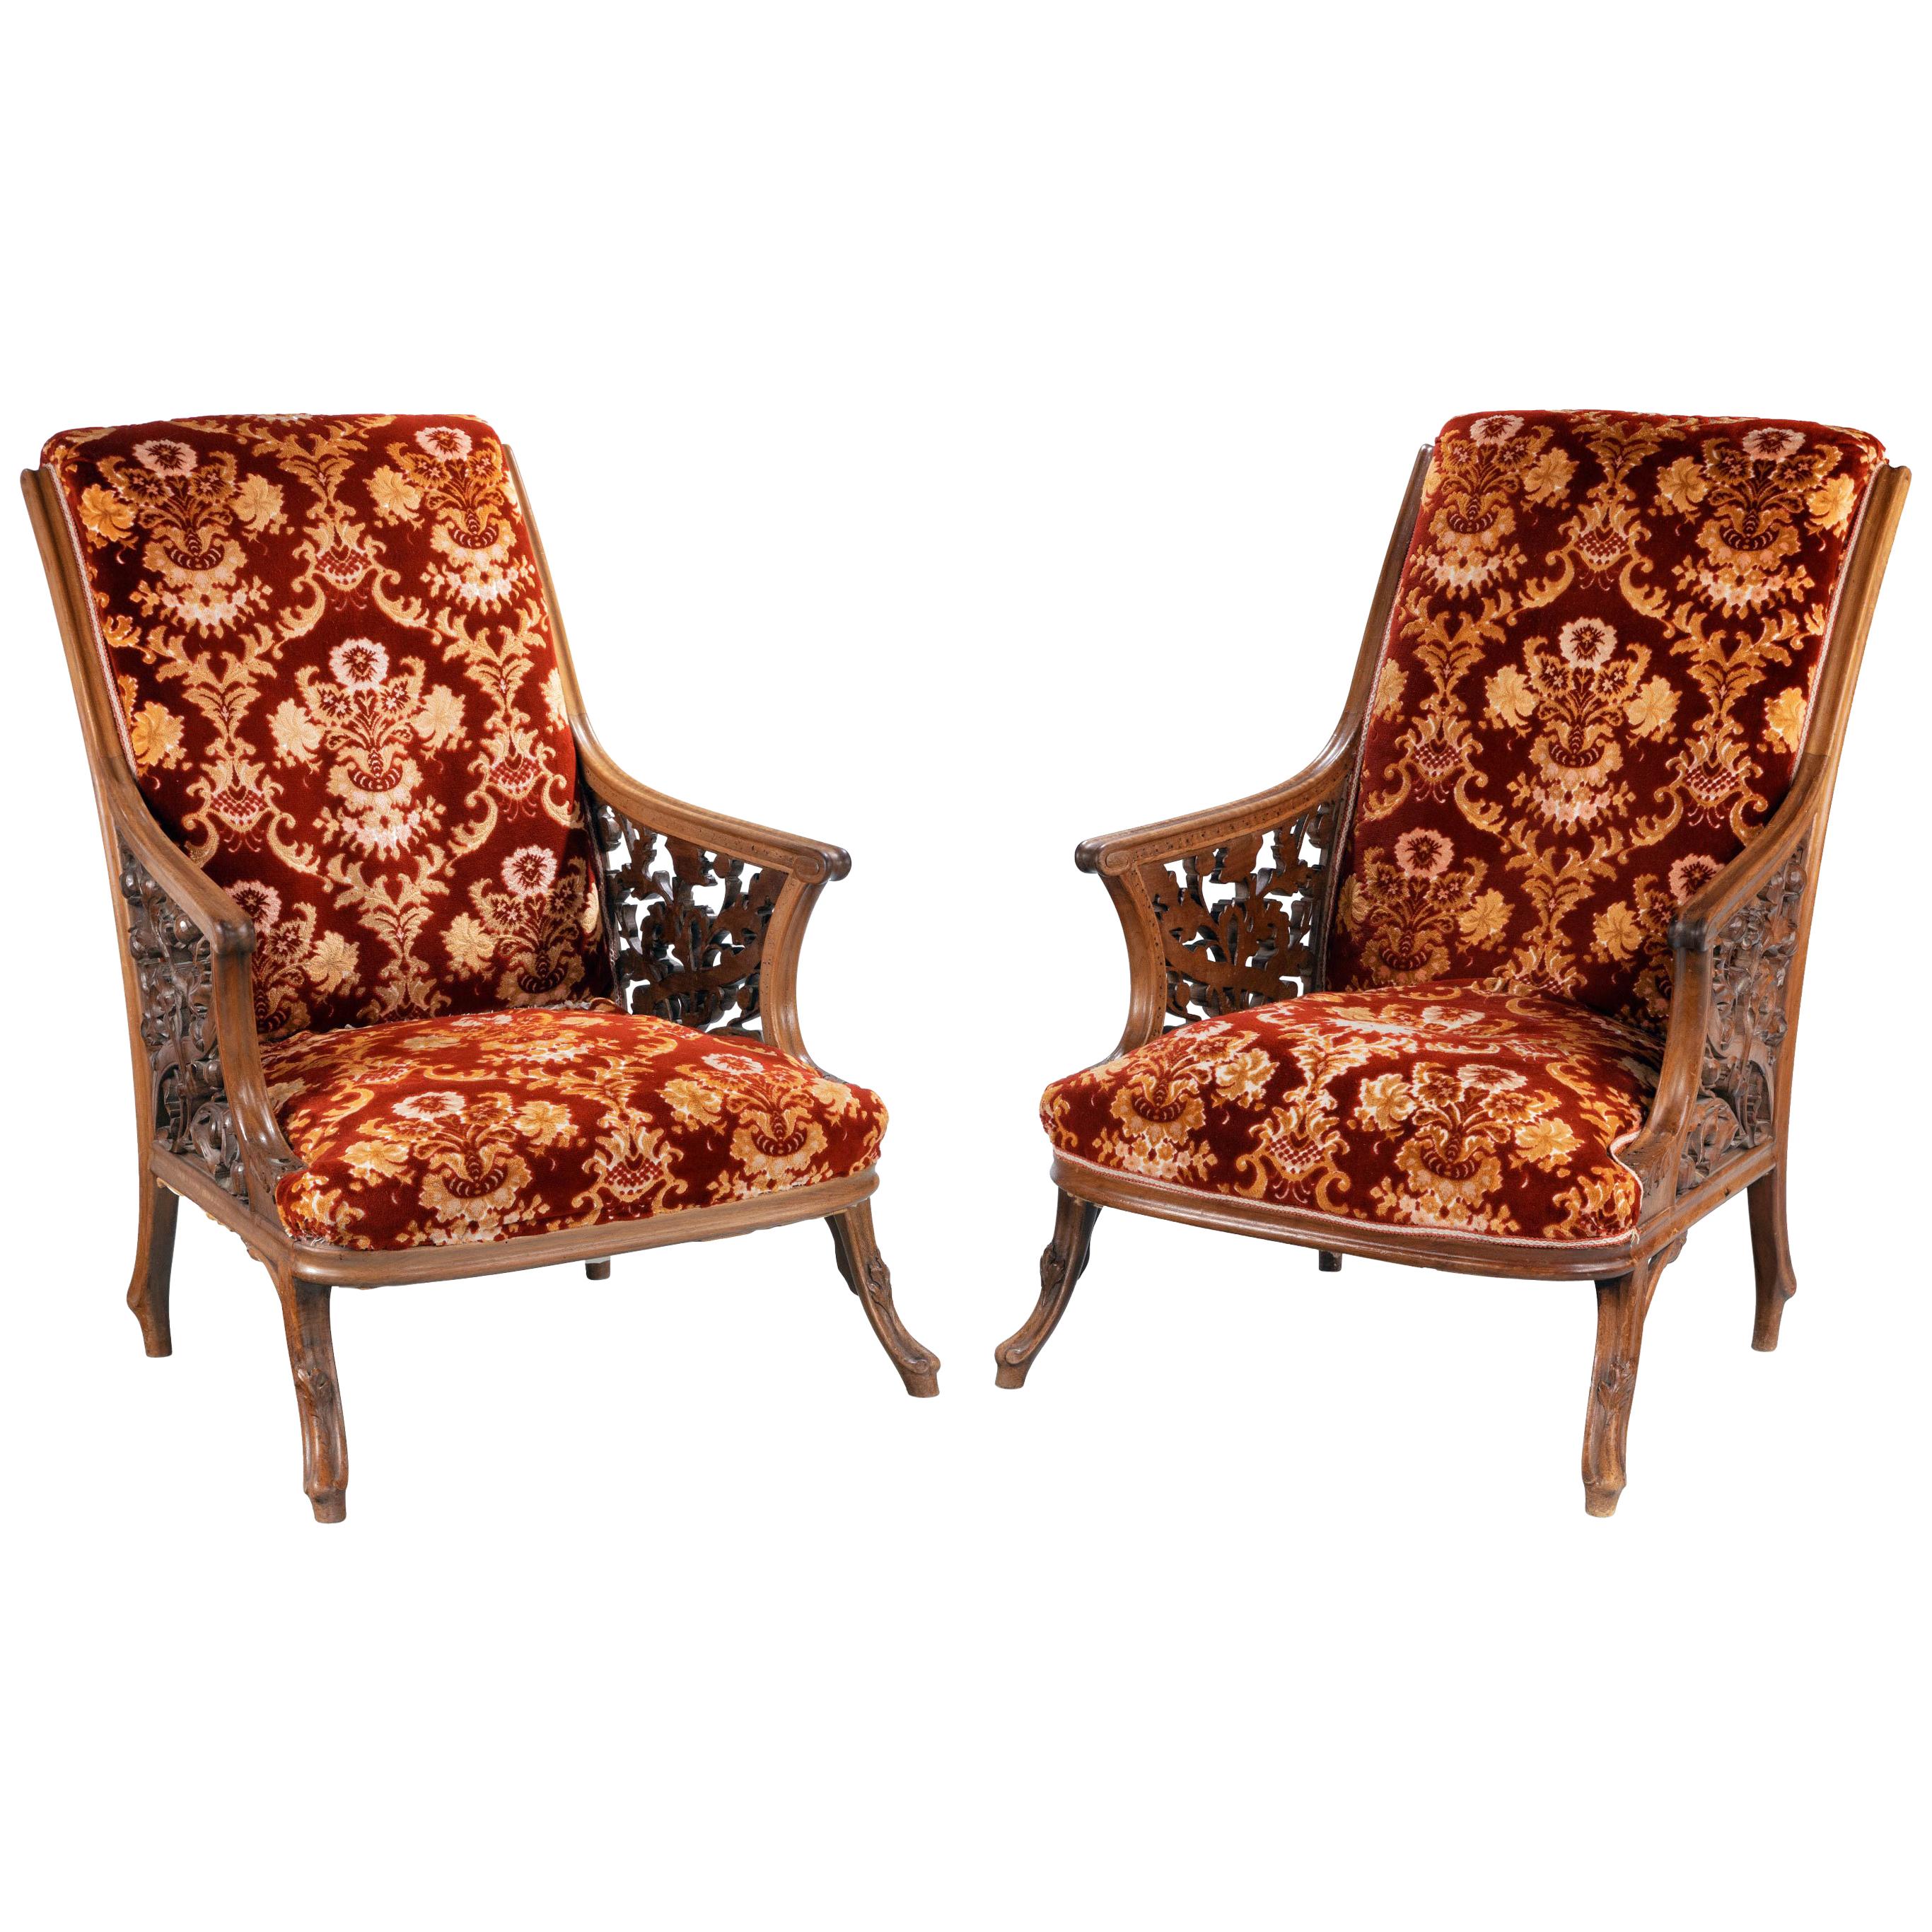 Most Unusual and Fine Pair of 19th Century Mahogany Framed Easy Chairs